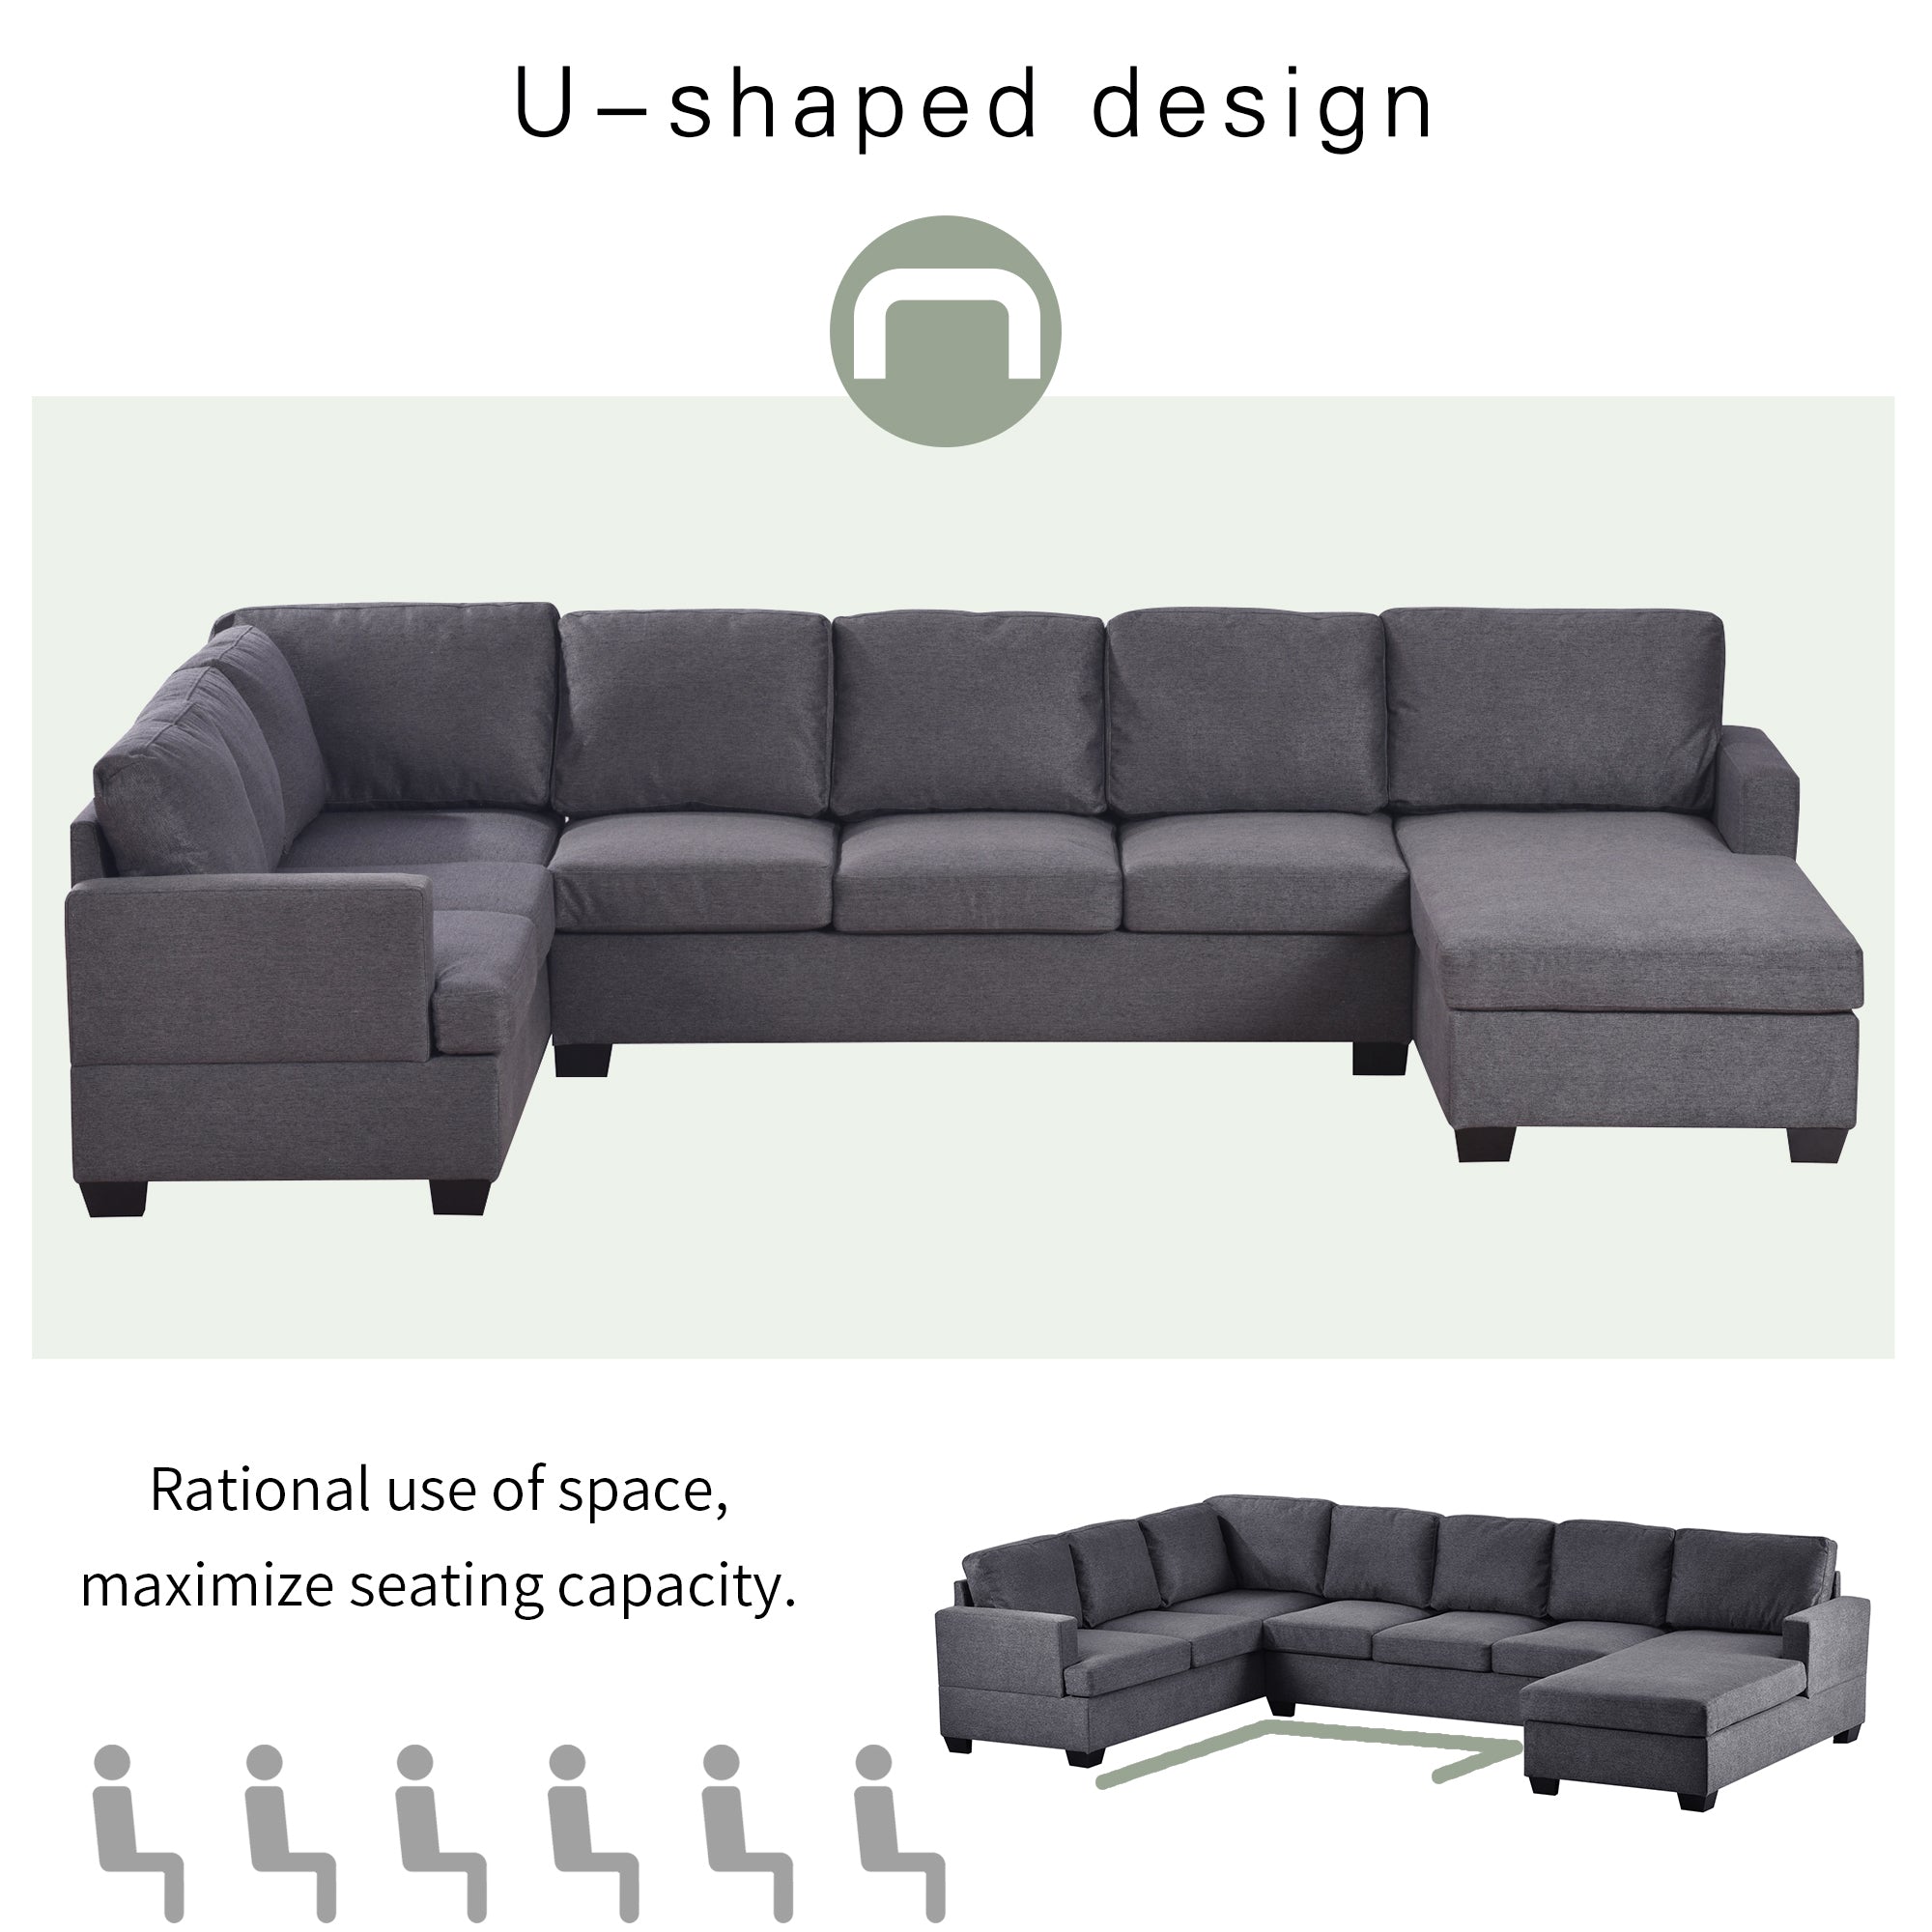 Ustyle Modern Large Upholstered  U-Shape Sectional Sofa, Extra Wide Chaise Lounge Couch,  Grey